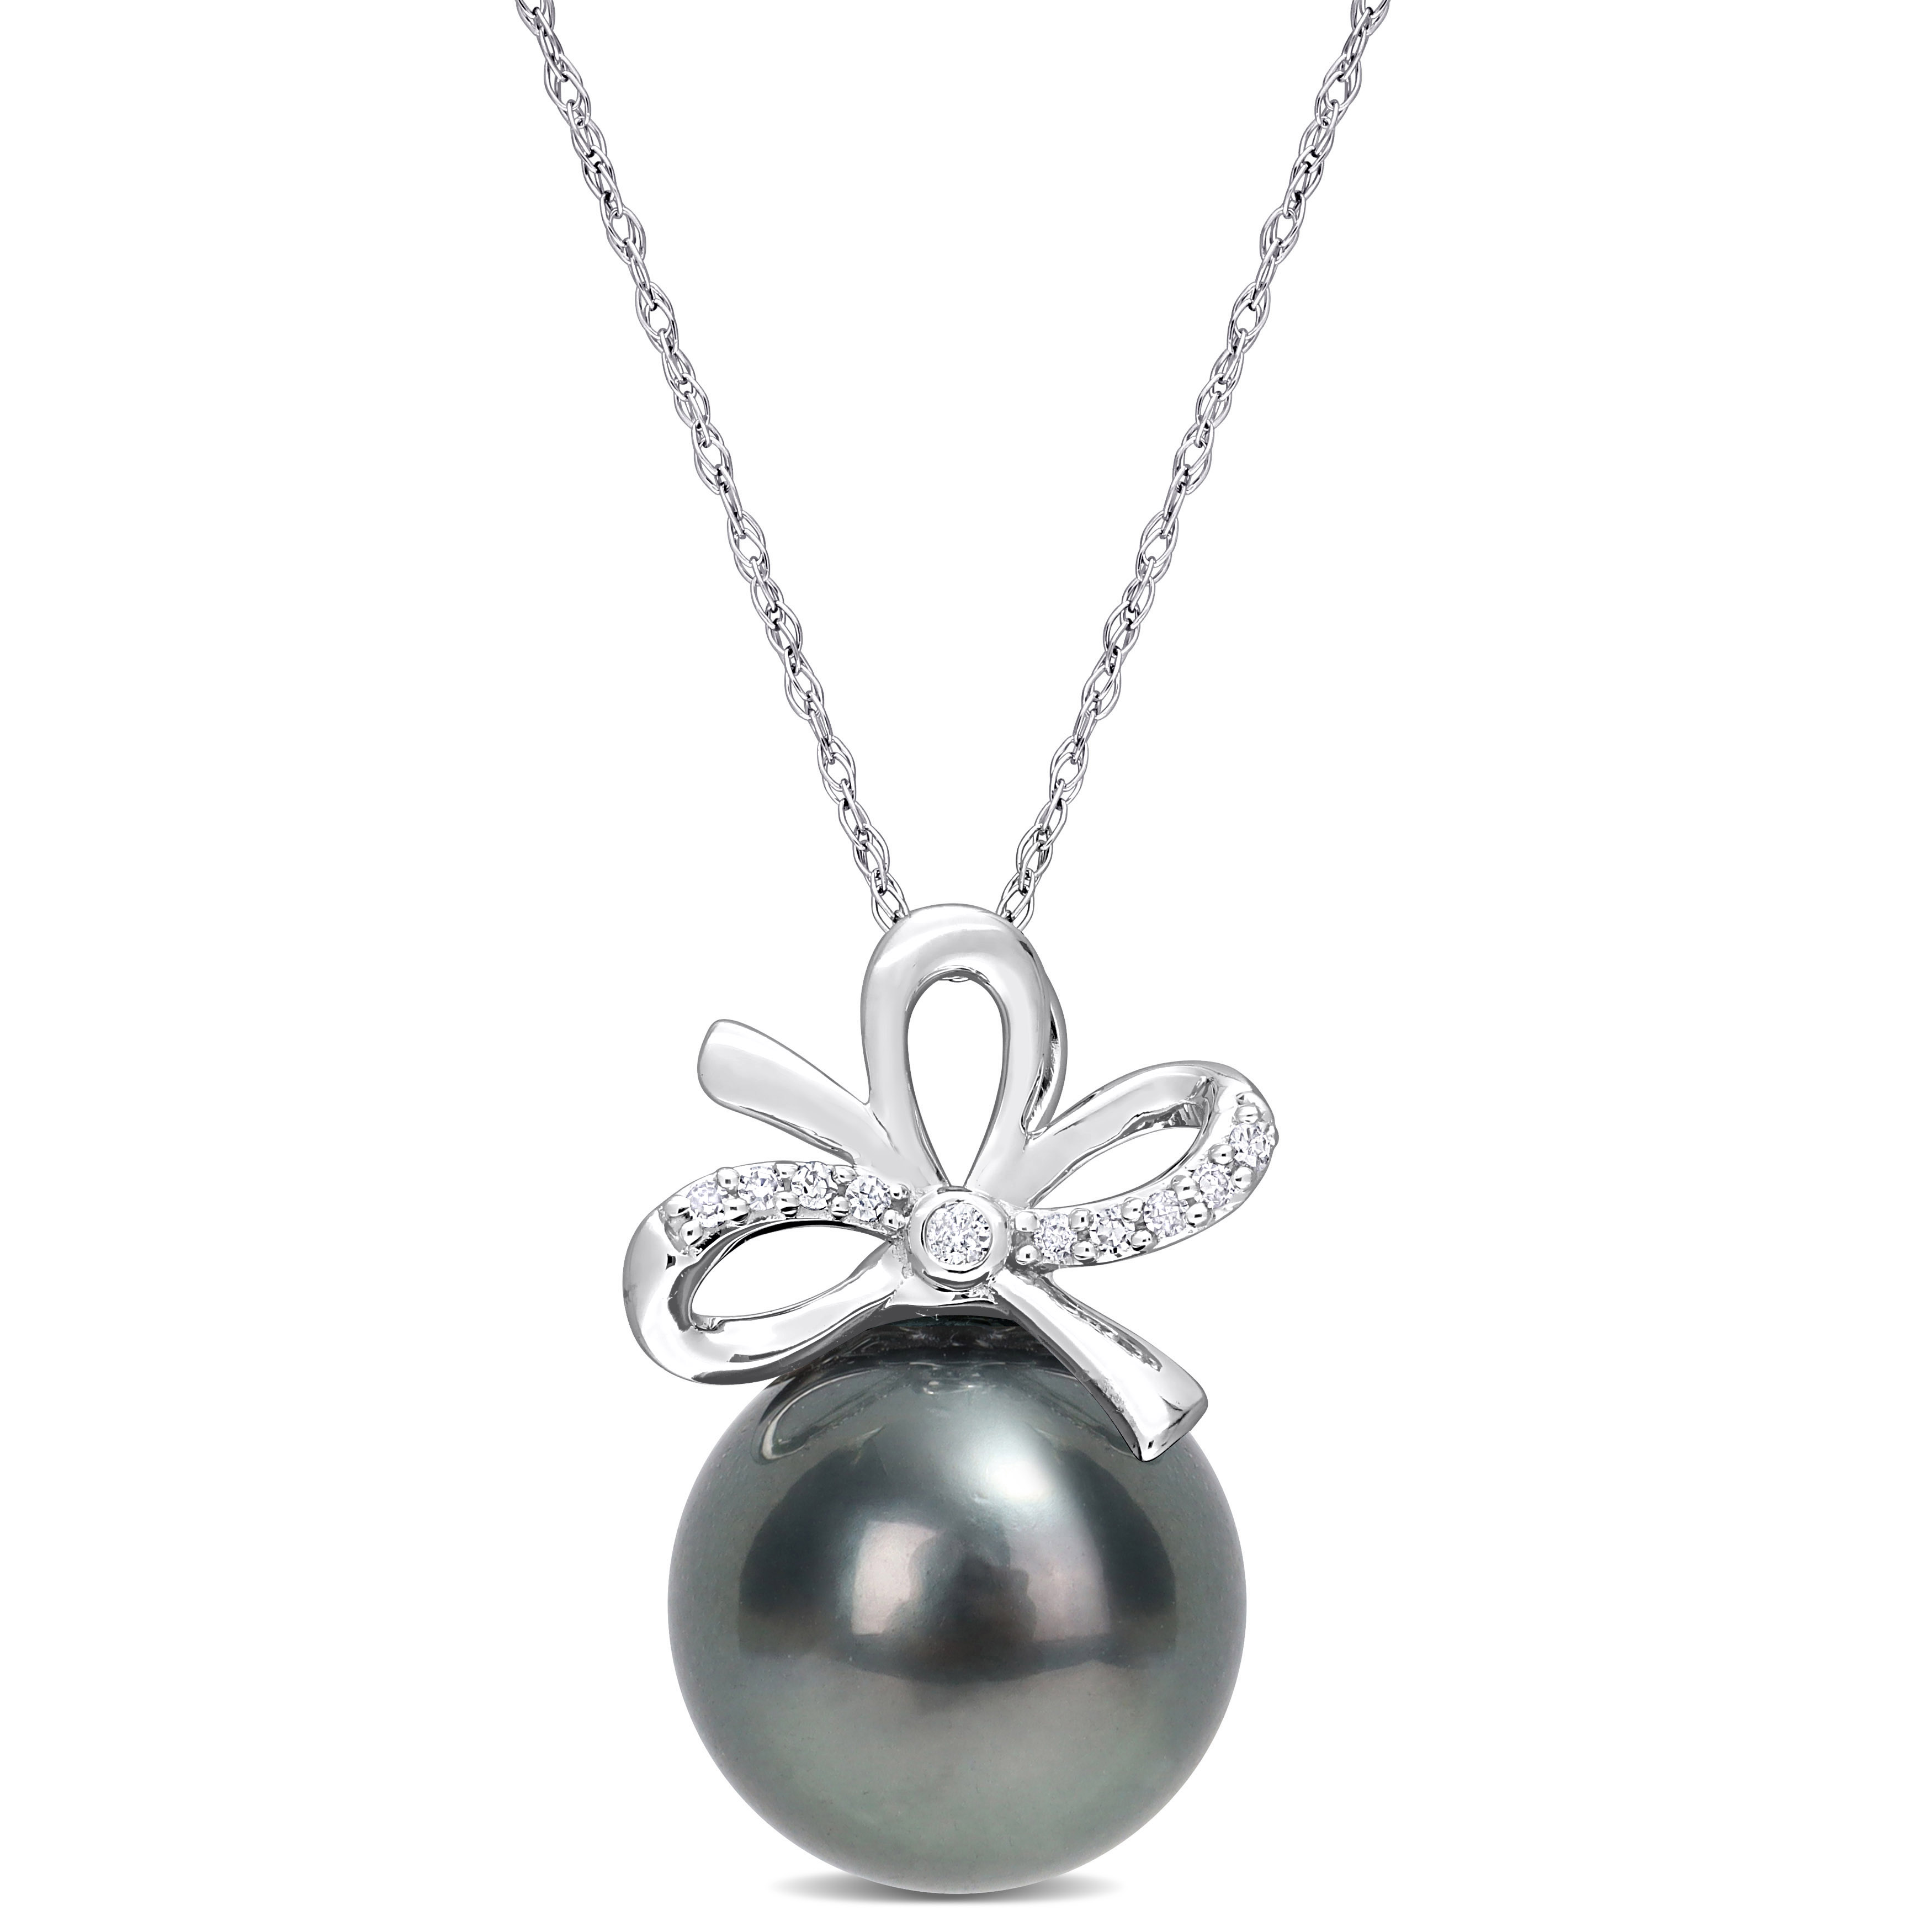 12-12.5 MM Black Tahitian Cultured Pearl & Diamond Accent Bow Pendant with Chain in 14k White Gold